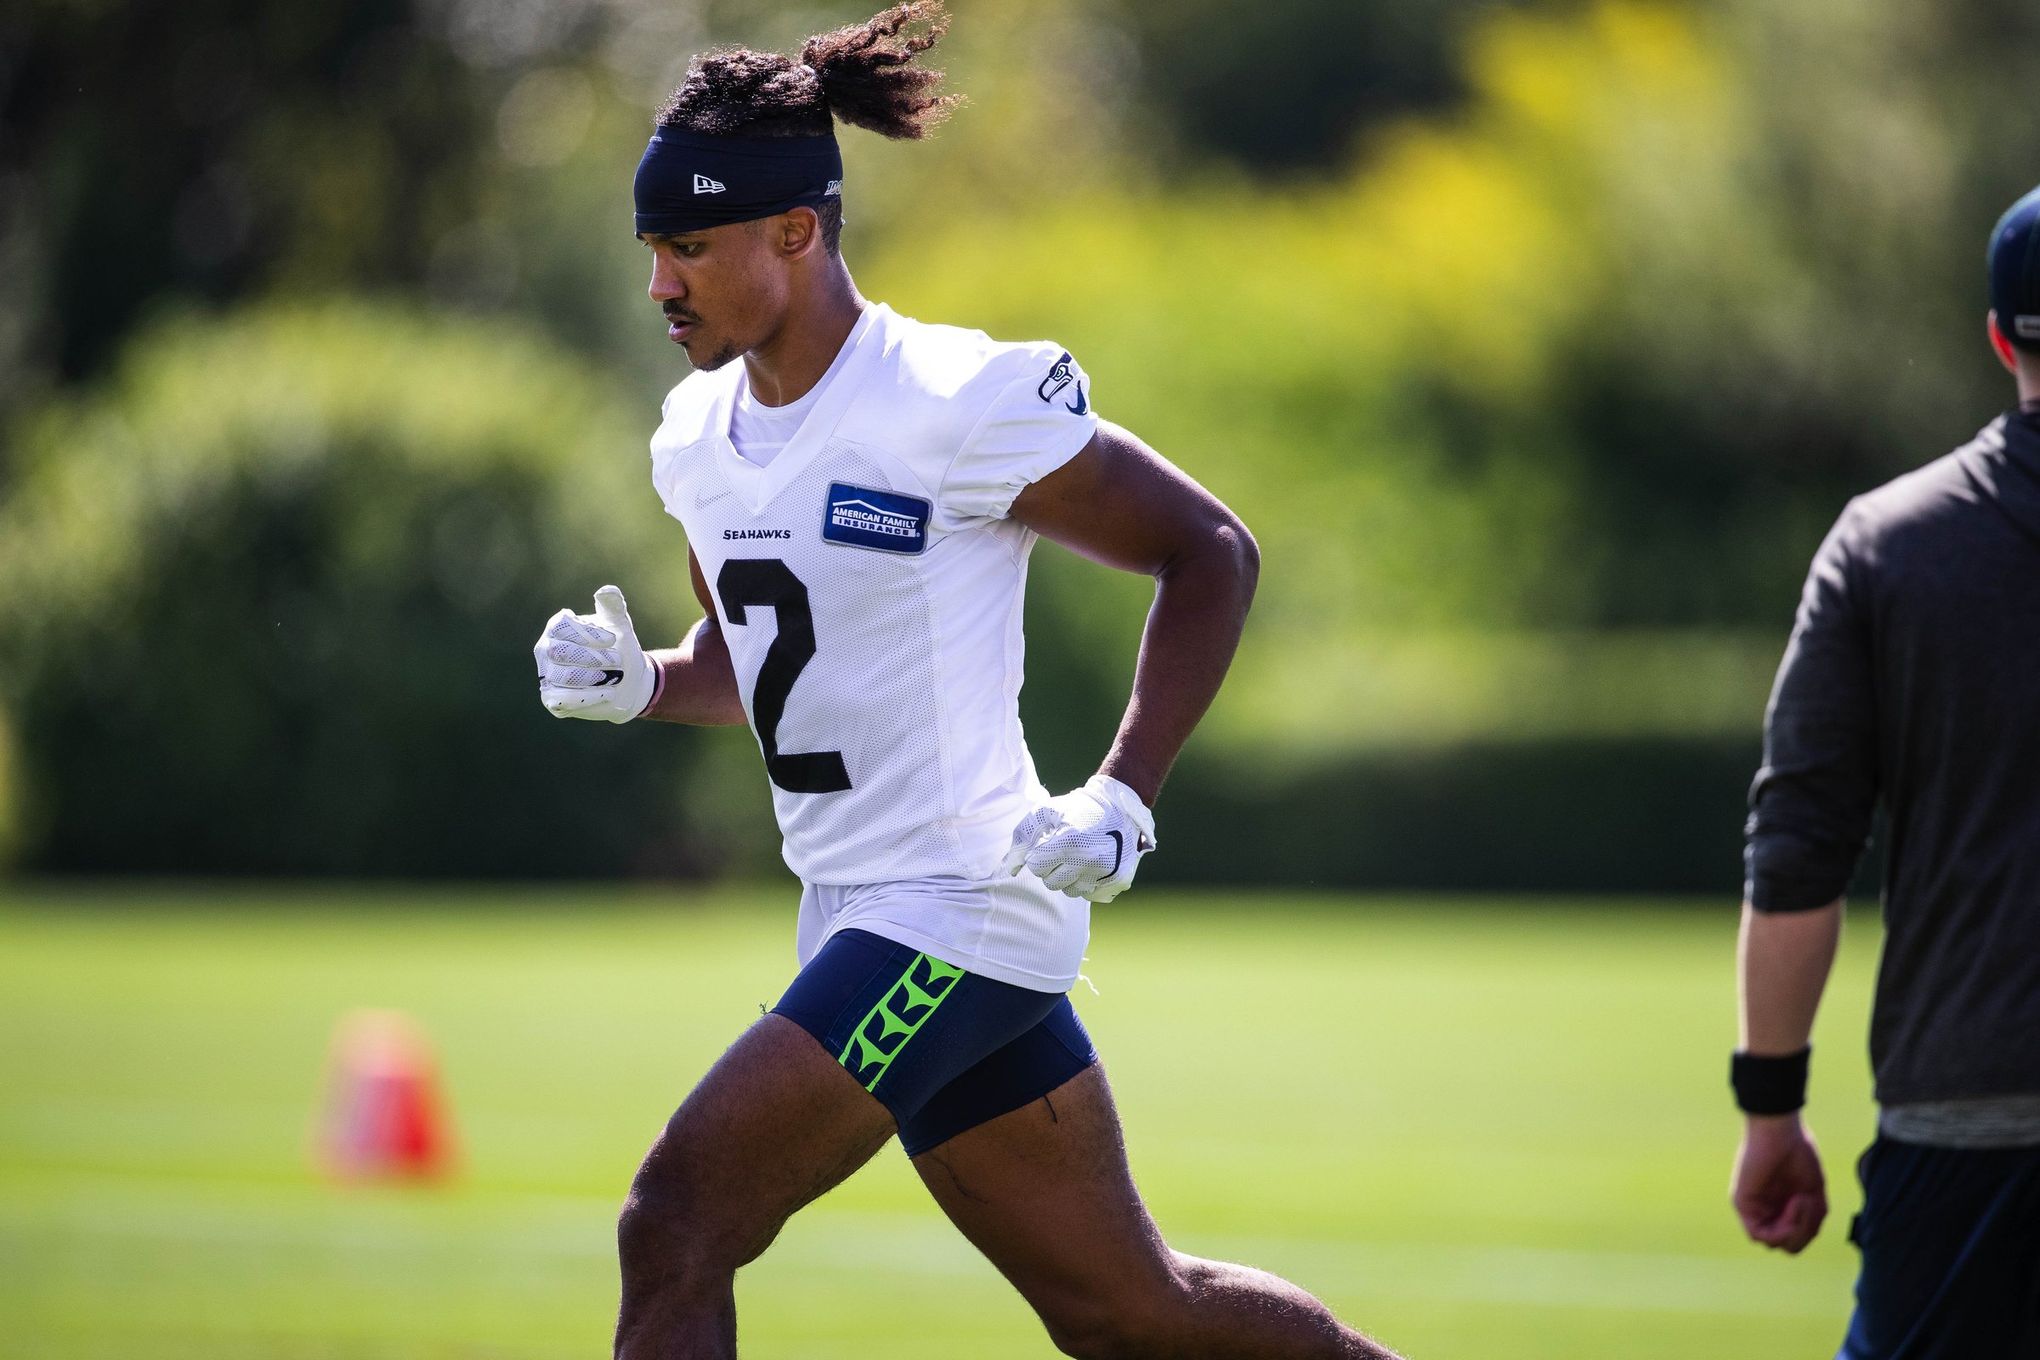 Ahkello Witherspoon with a spoon : r/Seahawks